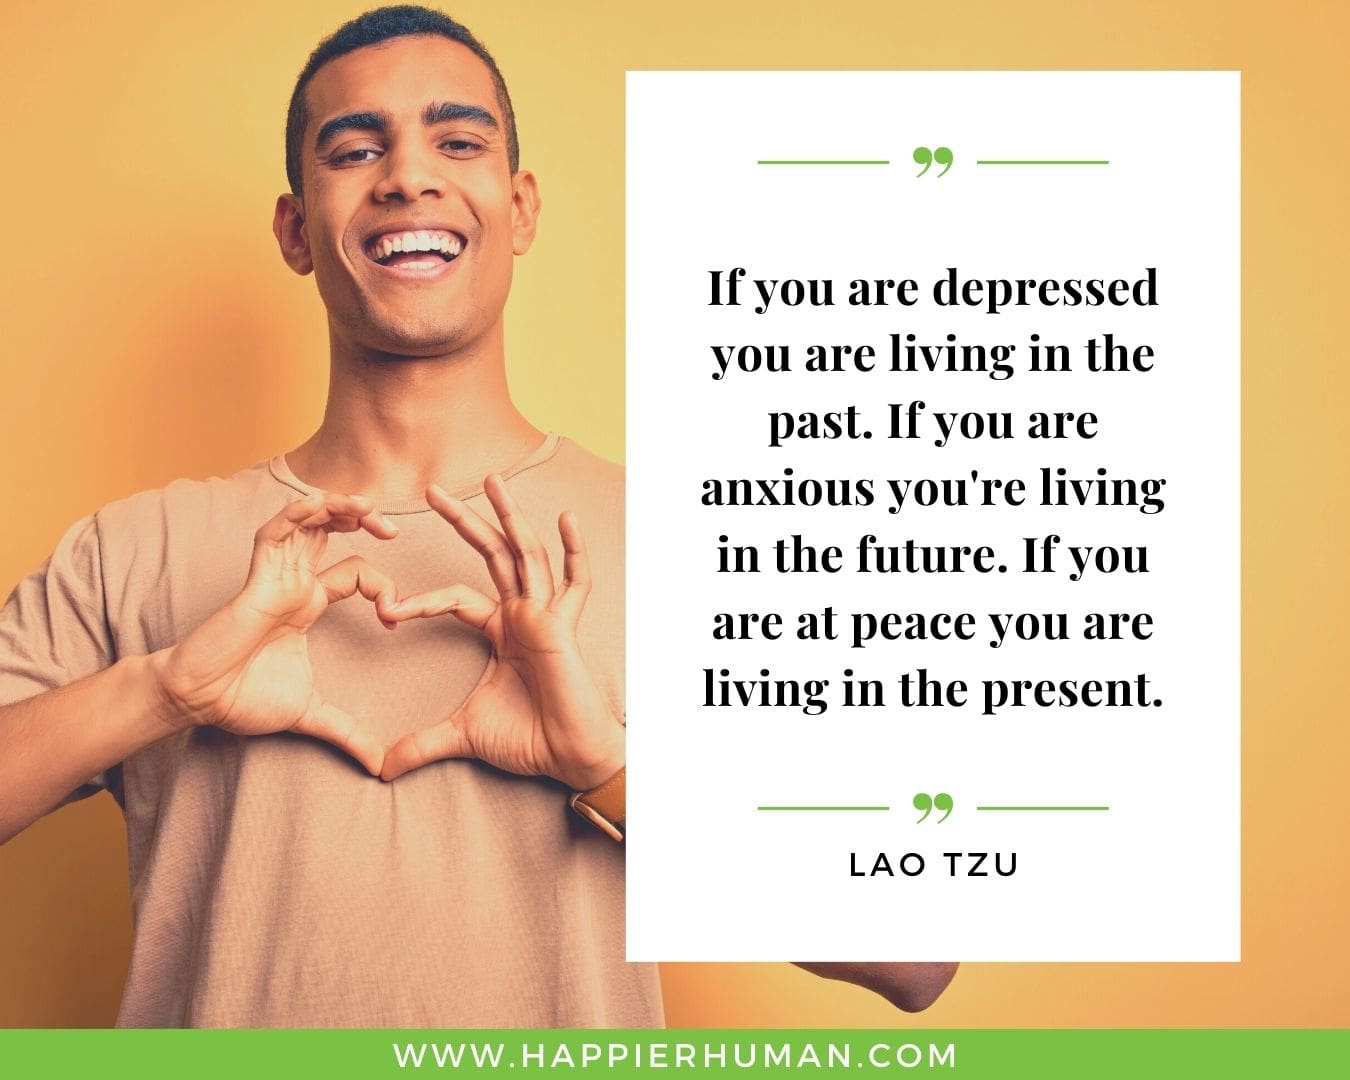 Positive Energy Quotes - “If you are depressed you are living in the past. If you are anxious you're living in the future. If you are at peace you are living in the present.” - Lao Tzu